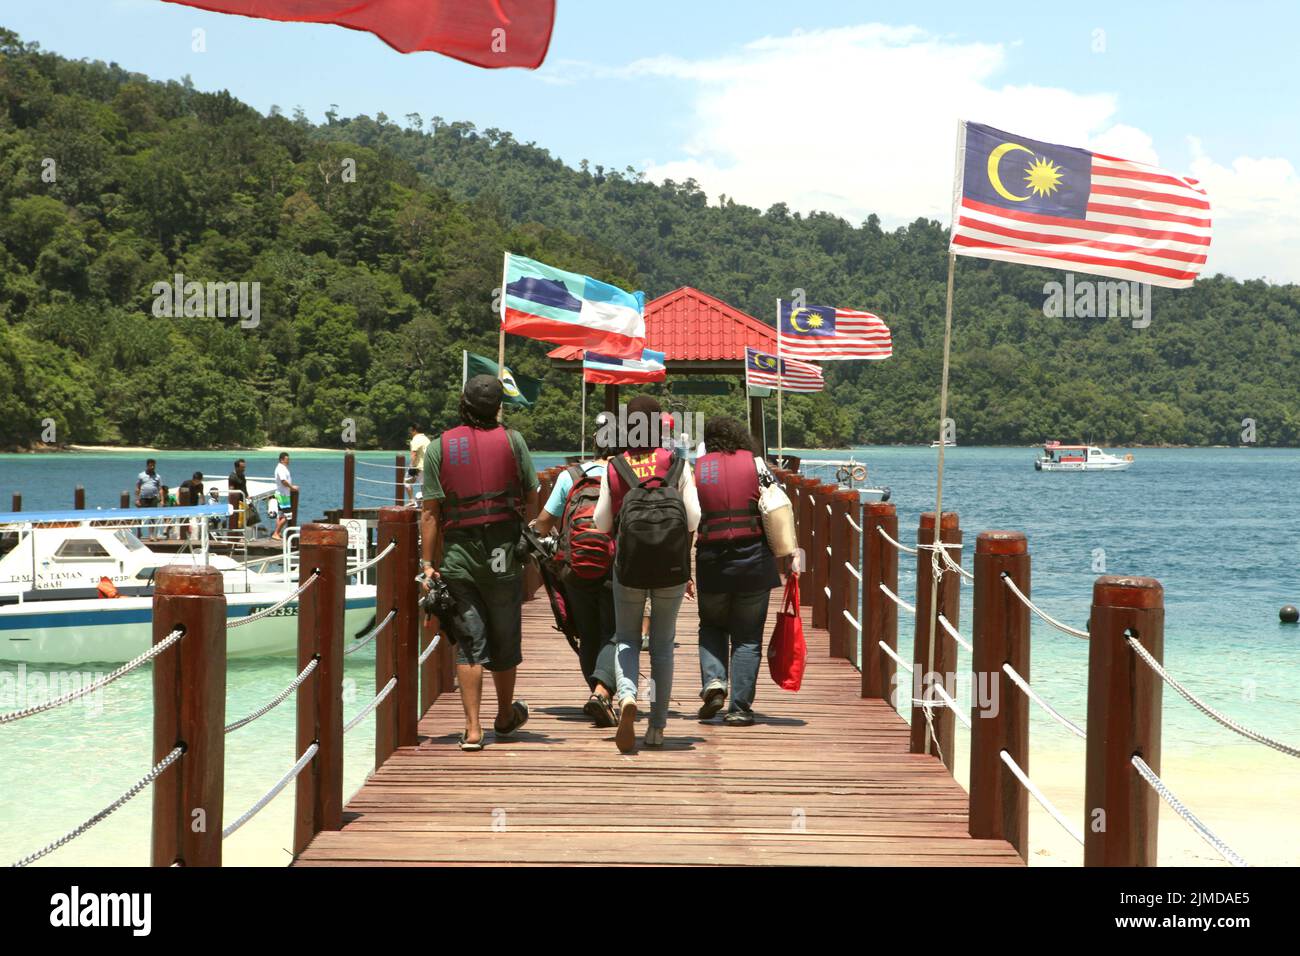 A group of journalists walking on a jetty on Pulau Sapi (Sapi Island), during a media trip organized by Air Asia within the area of Tunku Abdul Rahman Park in Sabah, Malaysia. Stock Photo